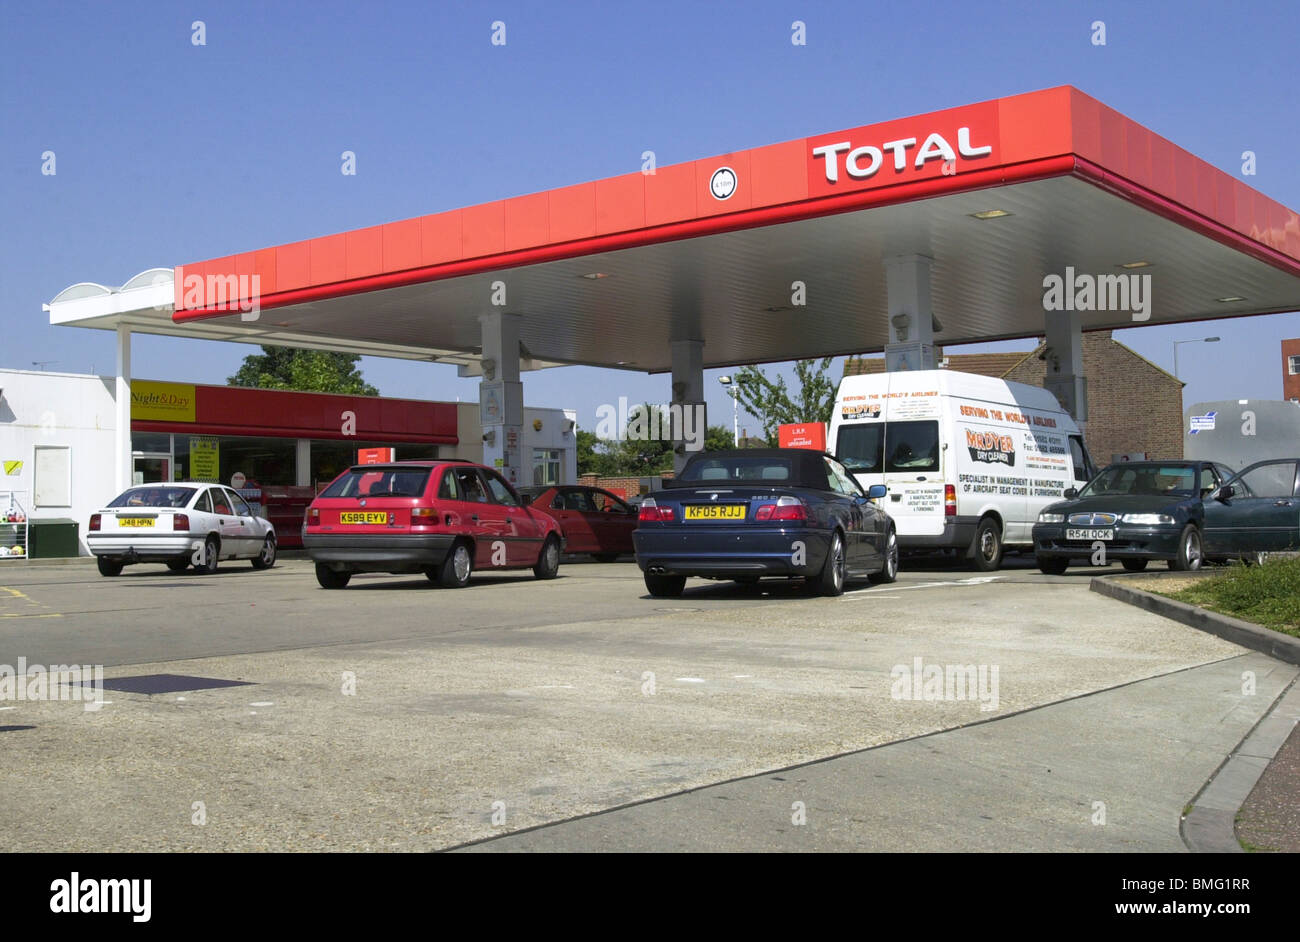 A Total petrol station uk Stock Photo